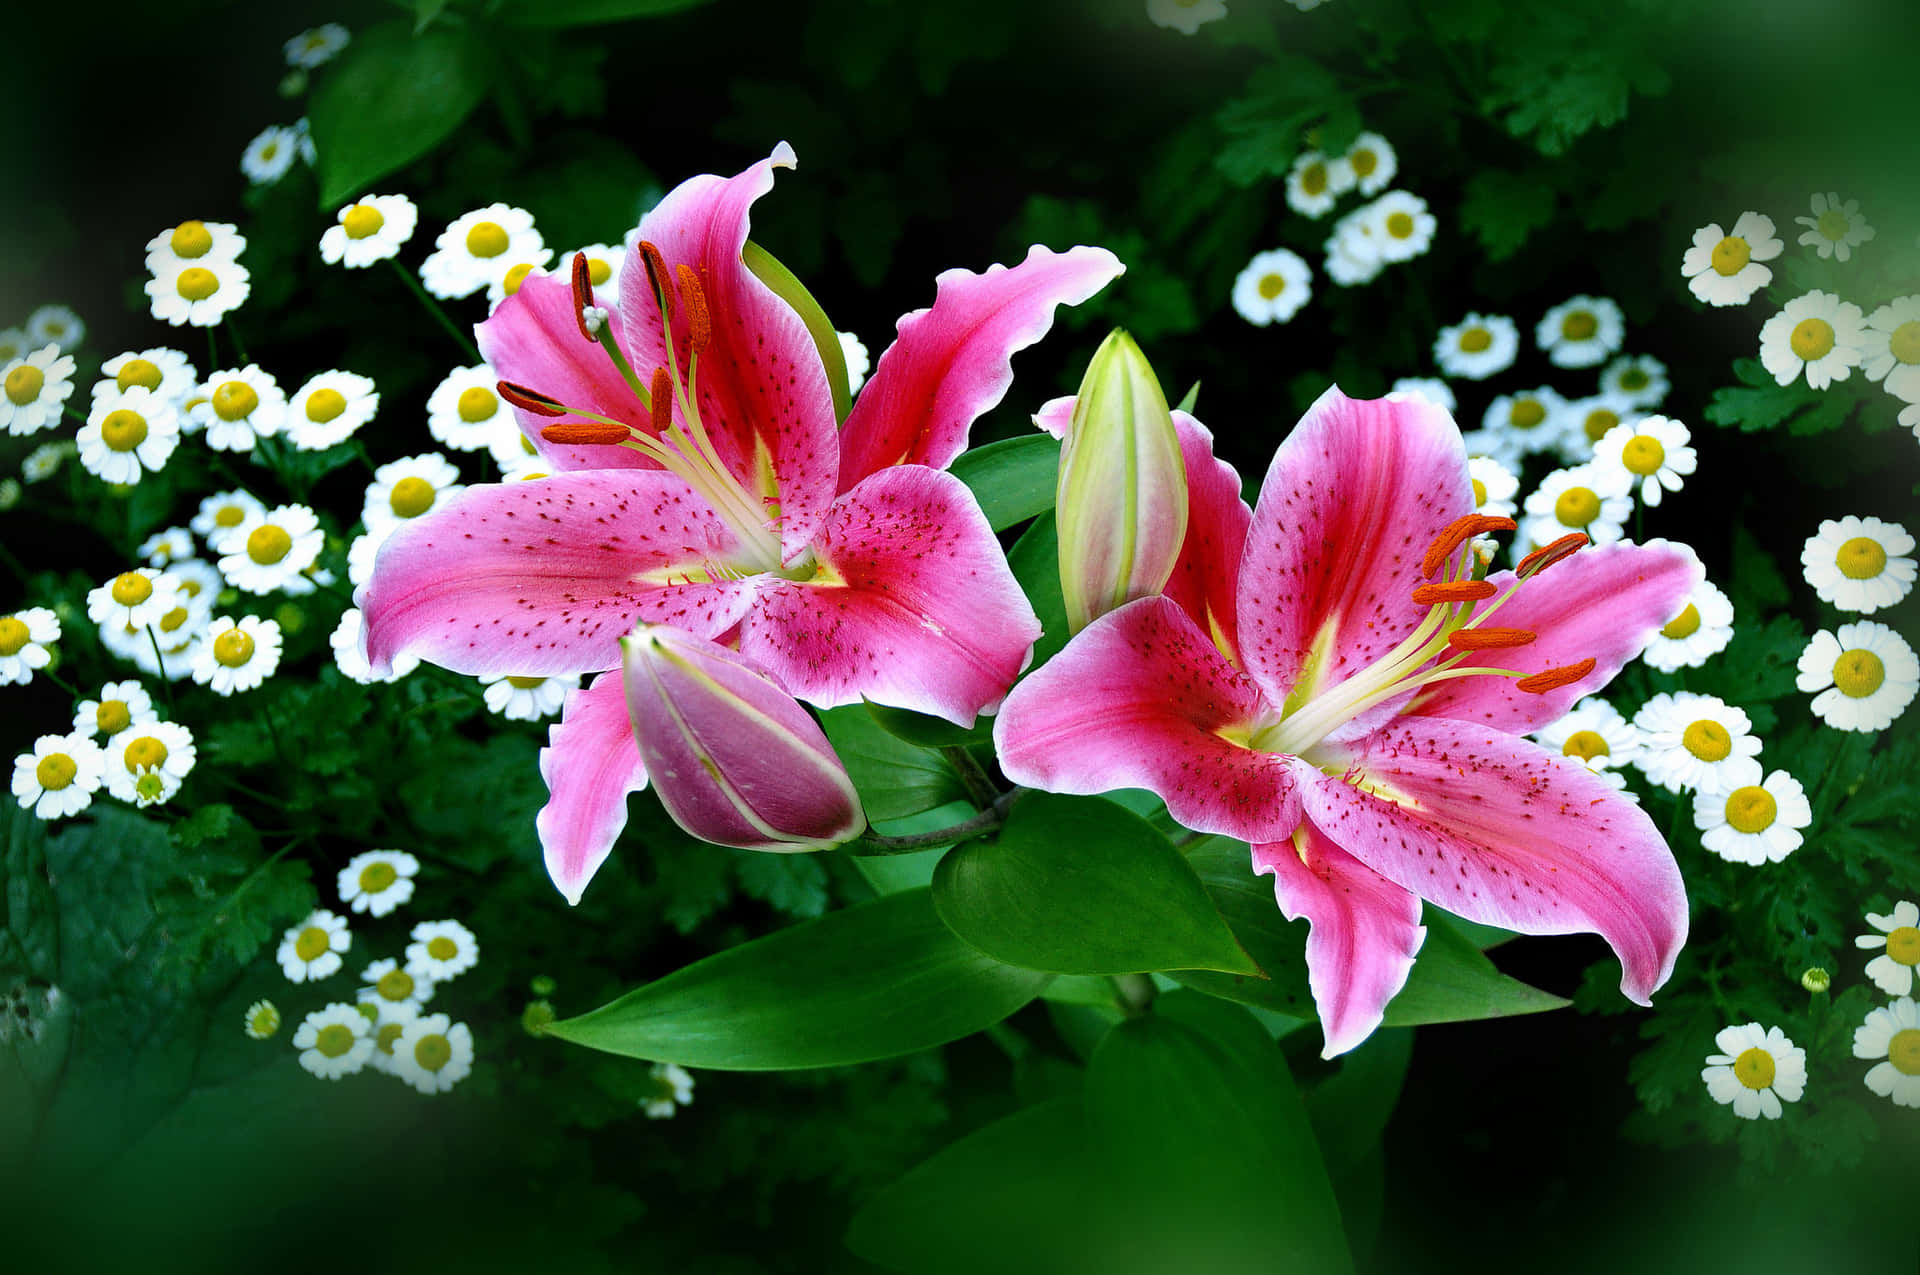 Caption: Blooming Lily Flowers on a Vibrant Background